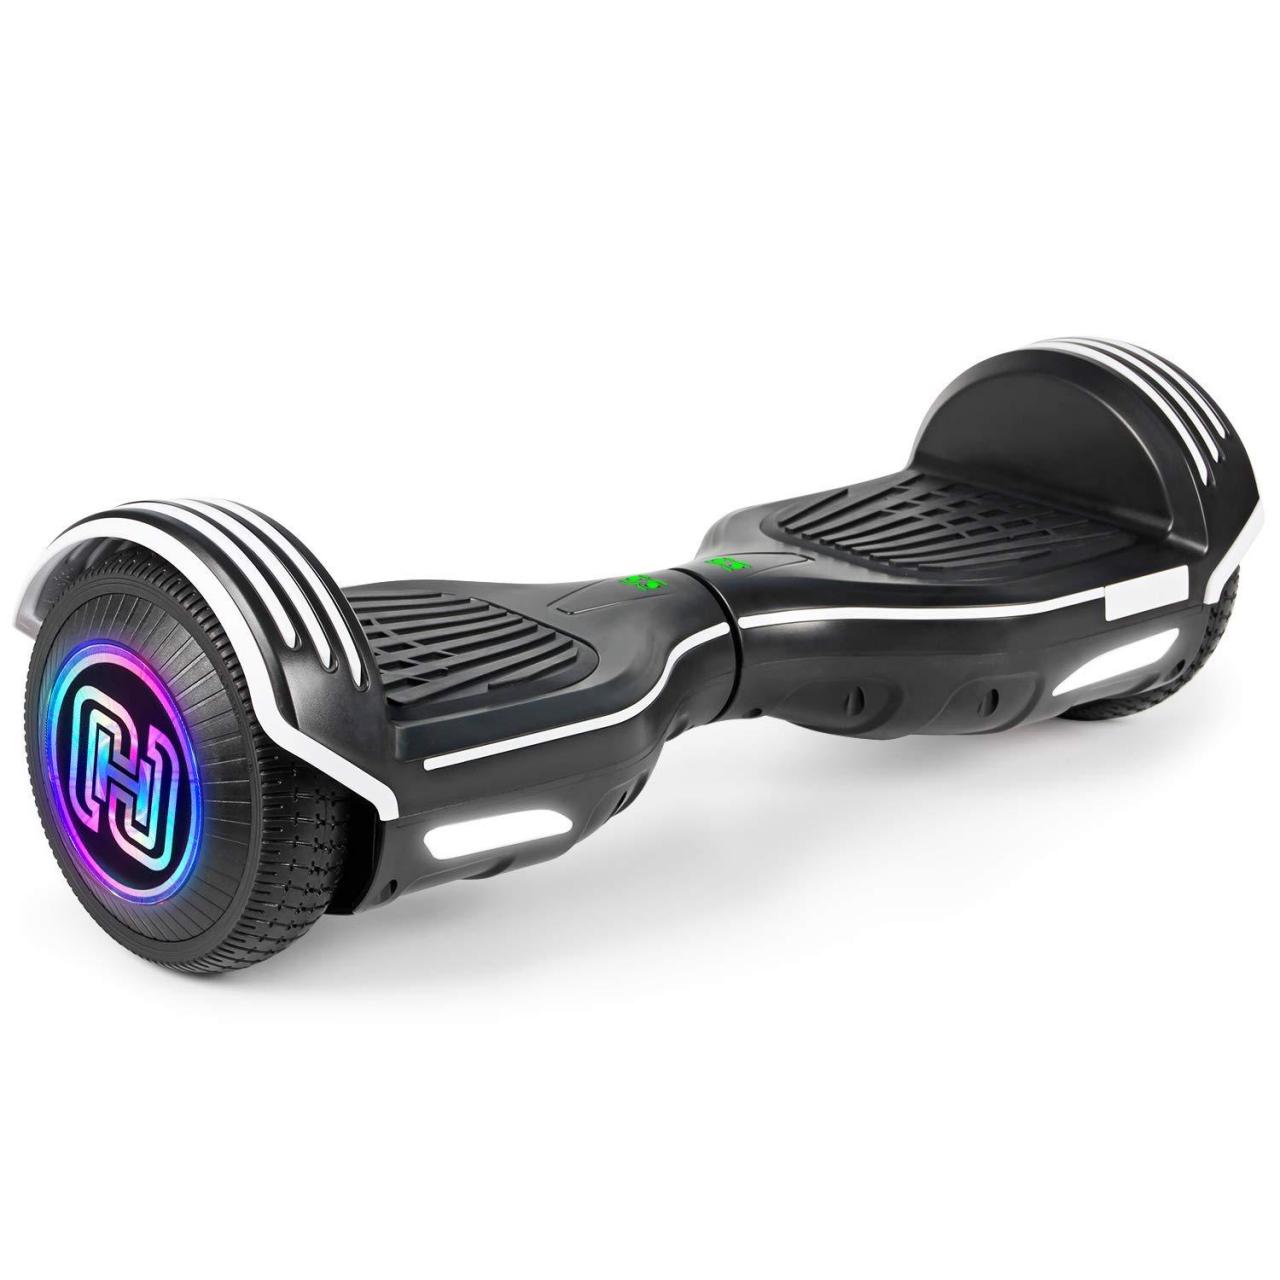 Buy SISIGAD Hoverboard Self Balancing Scooter 6.5 Two-Wheel Self Balancing  Hoverboard with Bluetooth Speaker and LED Lights Electric Scooter for Adult  Kids Gift Online in Hong Kong. B07MJF2HB9